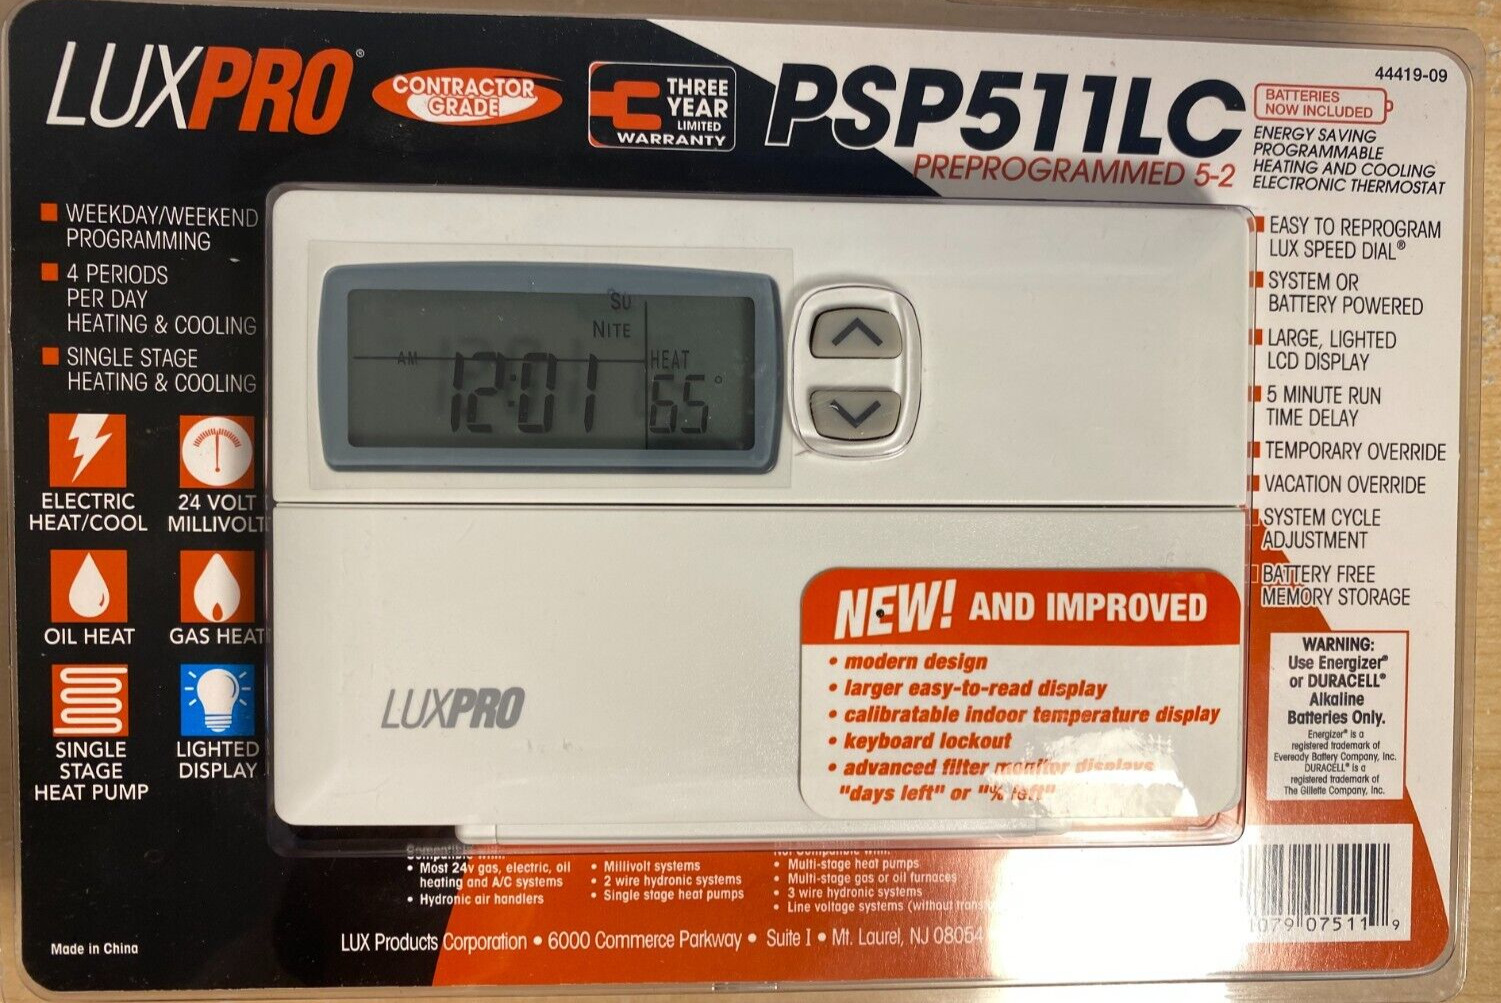 LUXPRO Contractor Grade Programmable Thermostat PSP511LC Heat/Cool